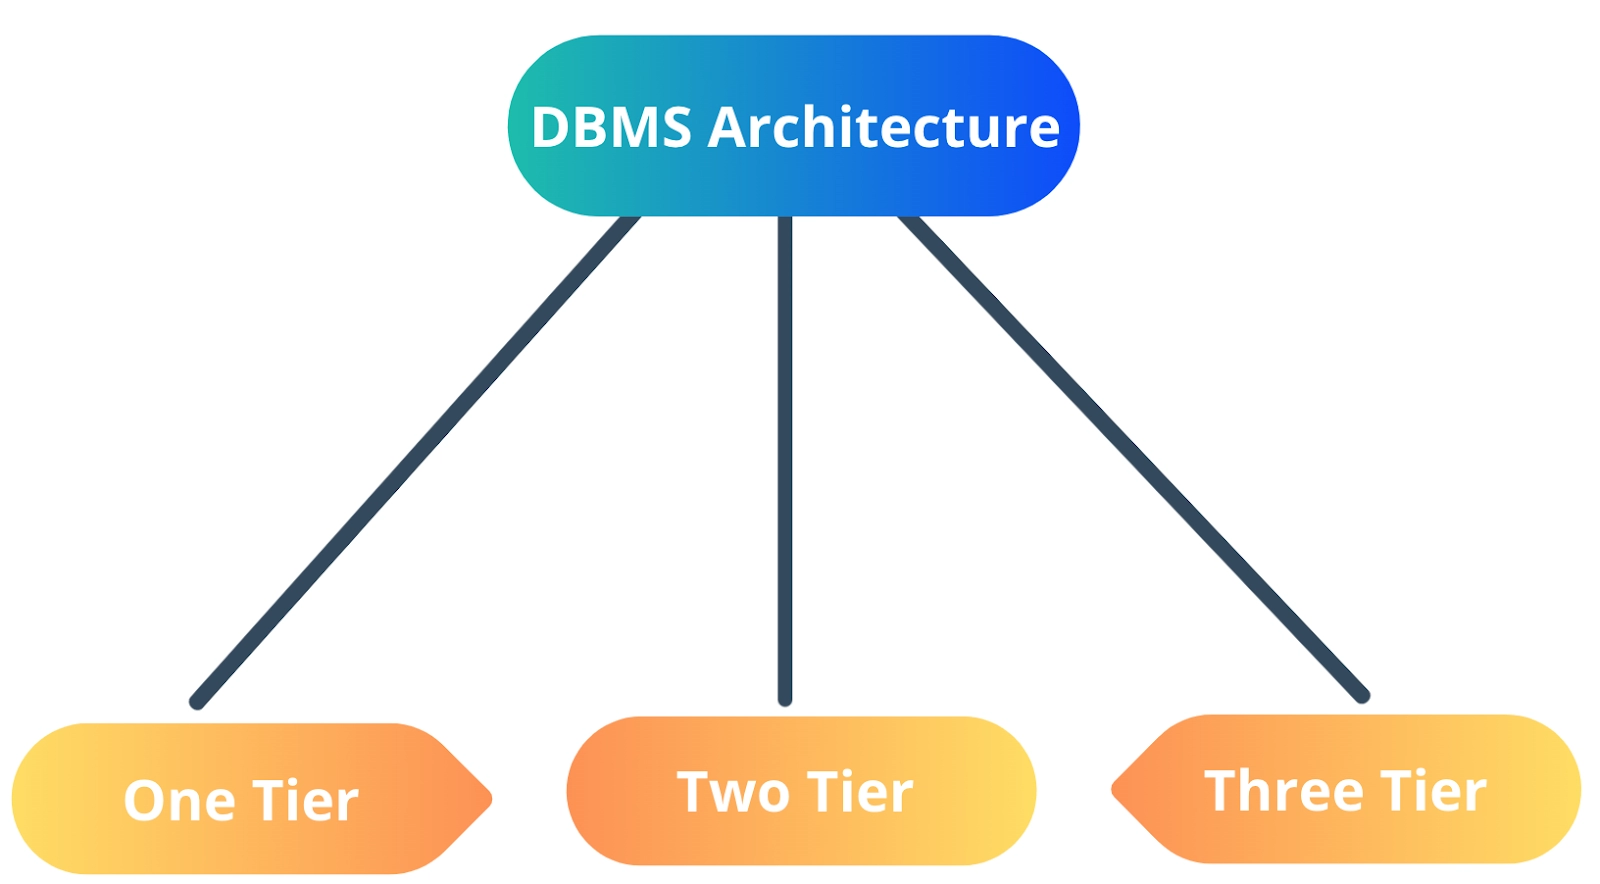 https://files.codingninjas.in/article_images/dbms-architecture-0-1640449669.webp